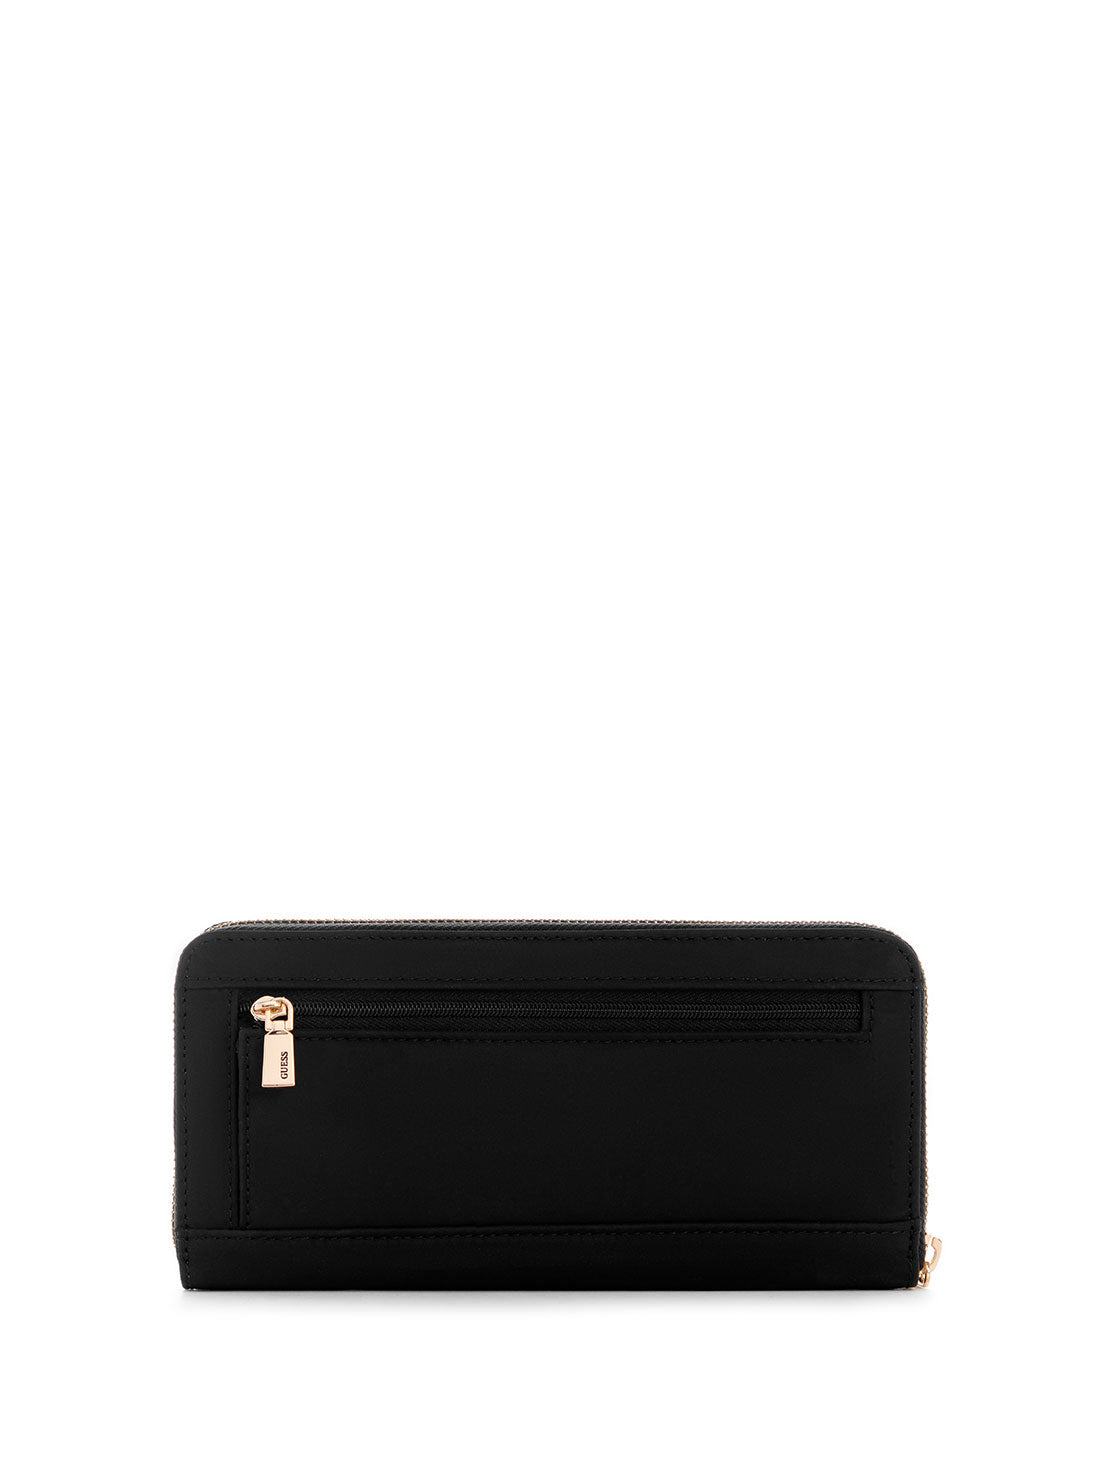 GUESS Women's Eco Black Gemma Large Wallet EYG839546 Back View